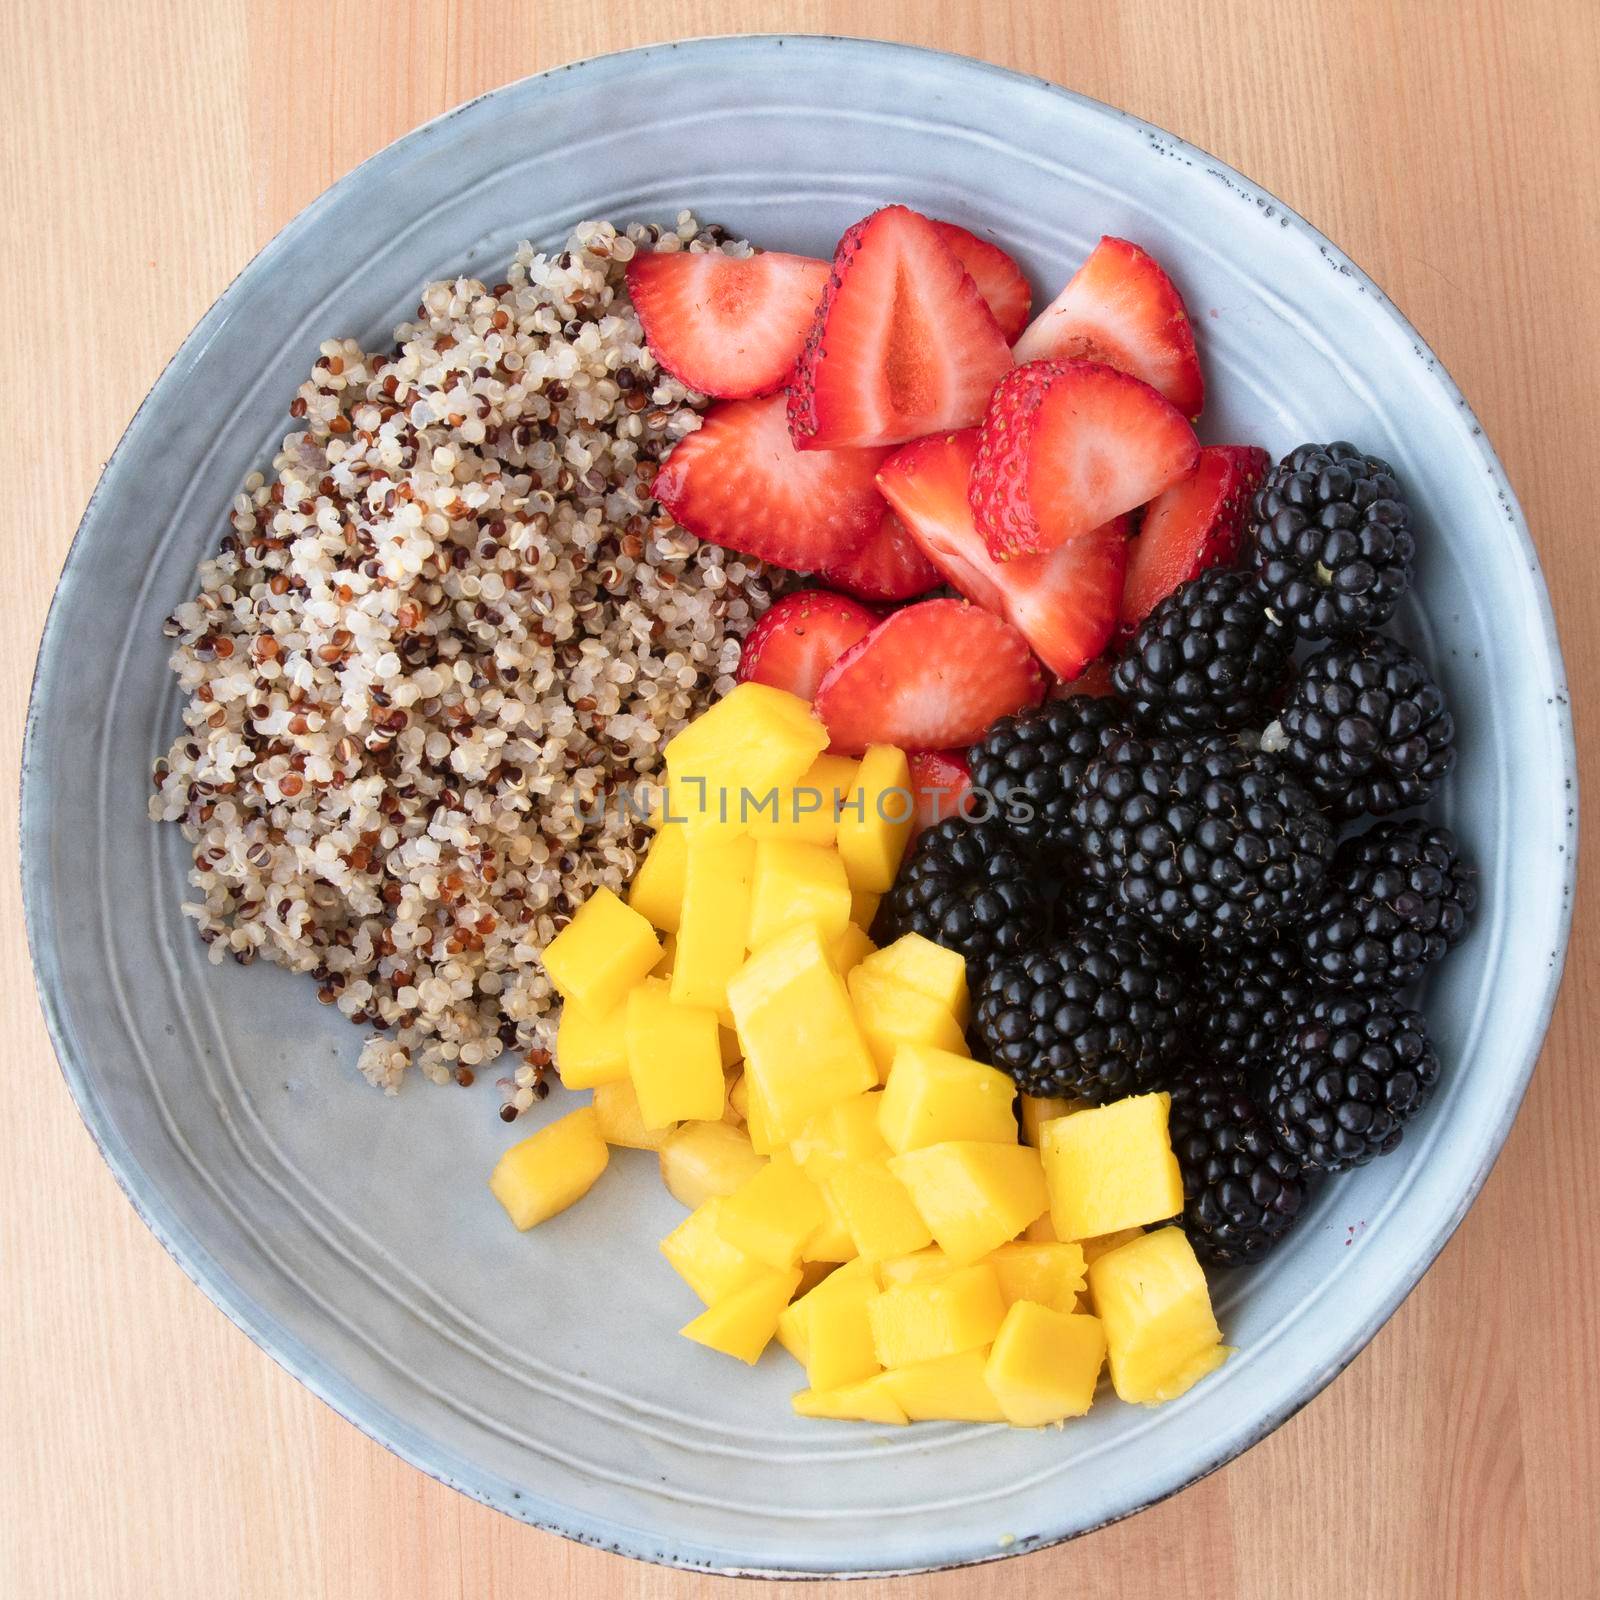 Blue bowl with quinoa, strawberry slices, chopped nectarines and blackberries on wooden surface, image 5 of 8